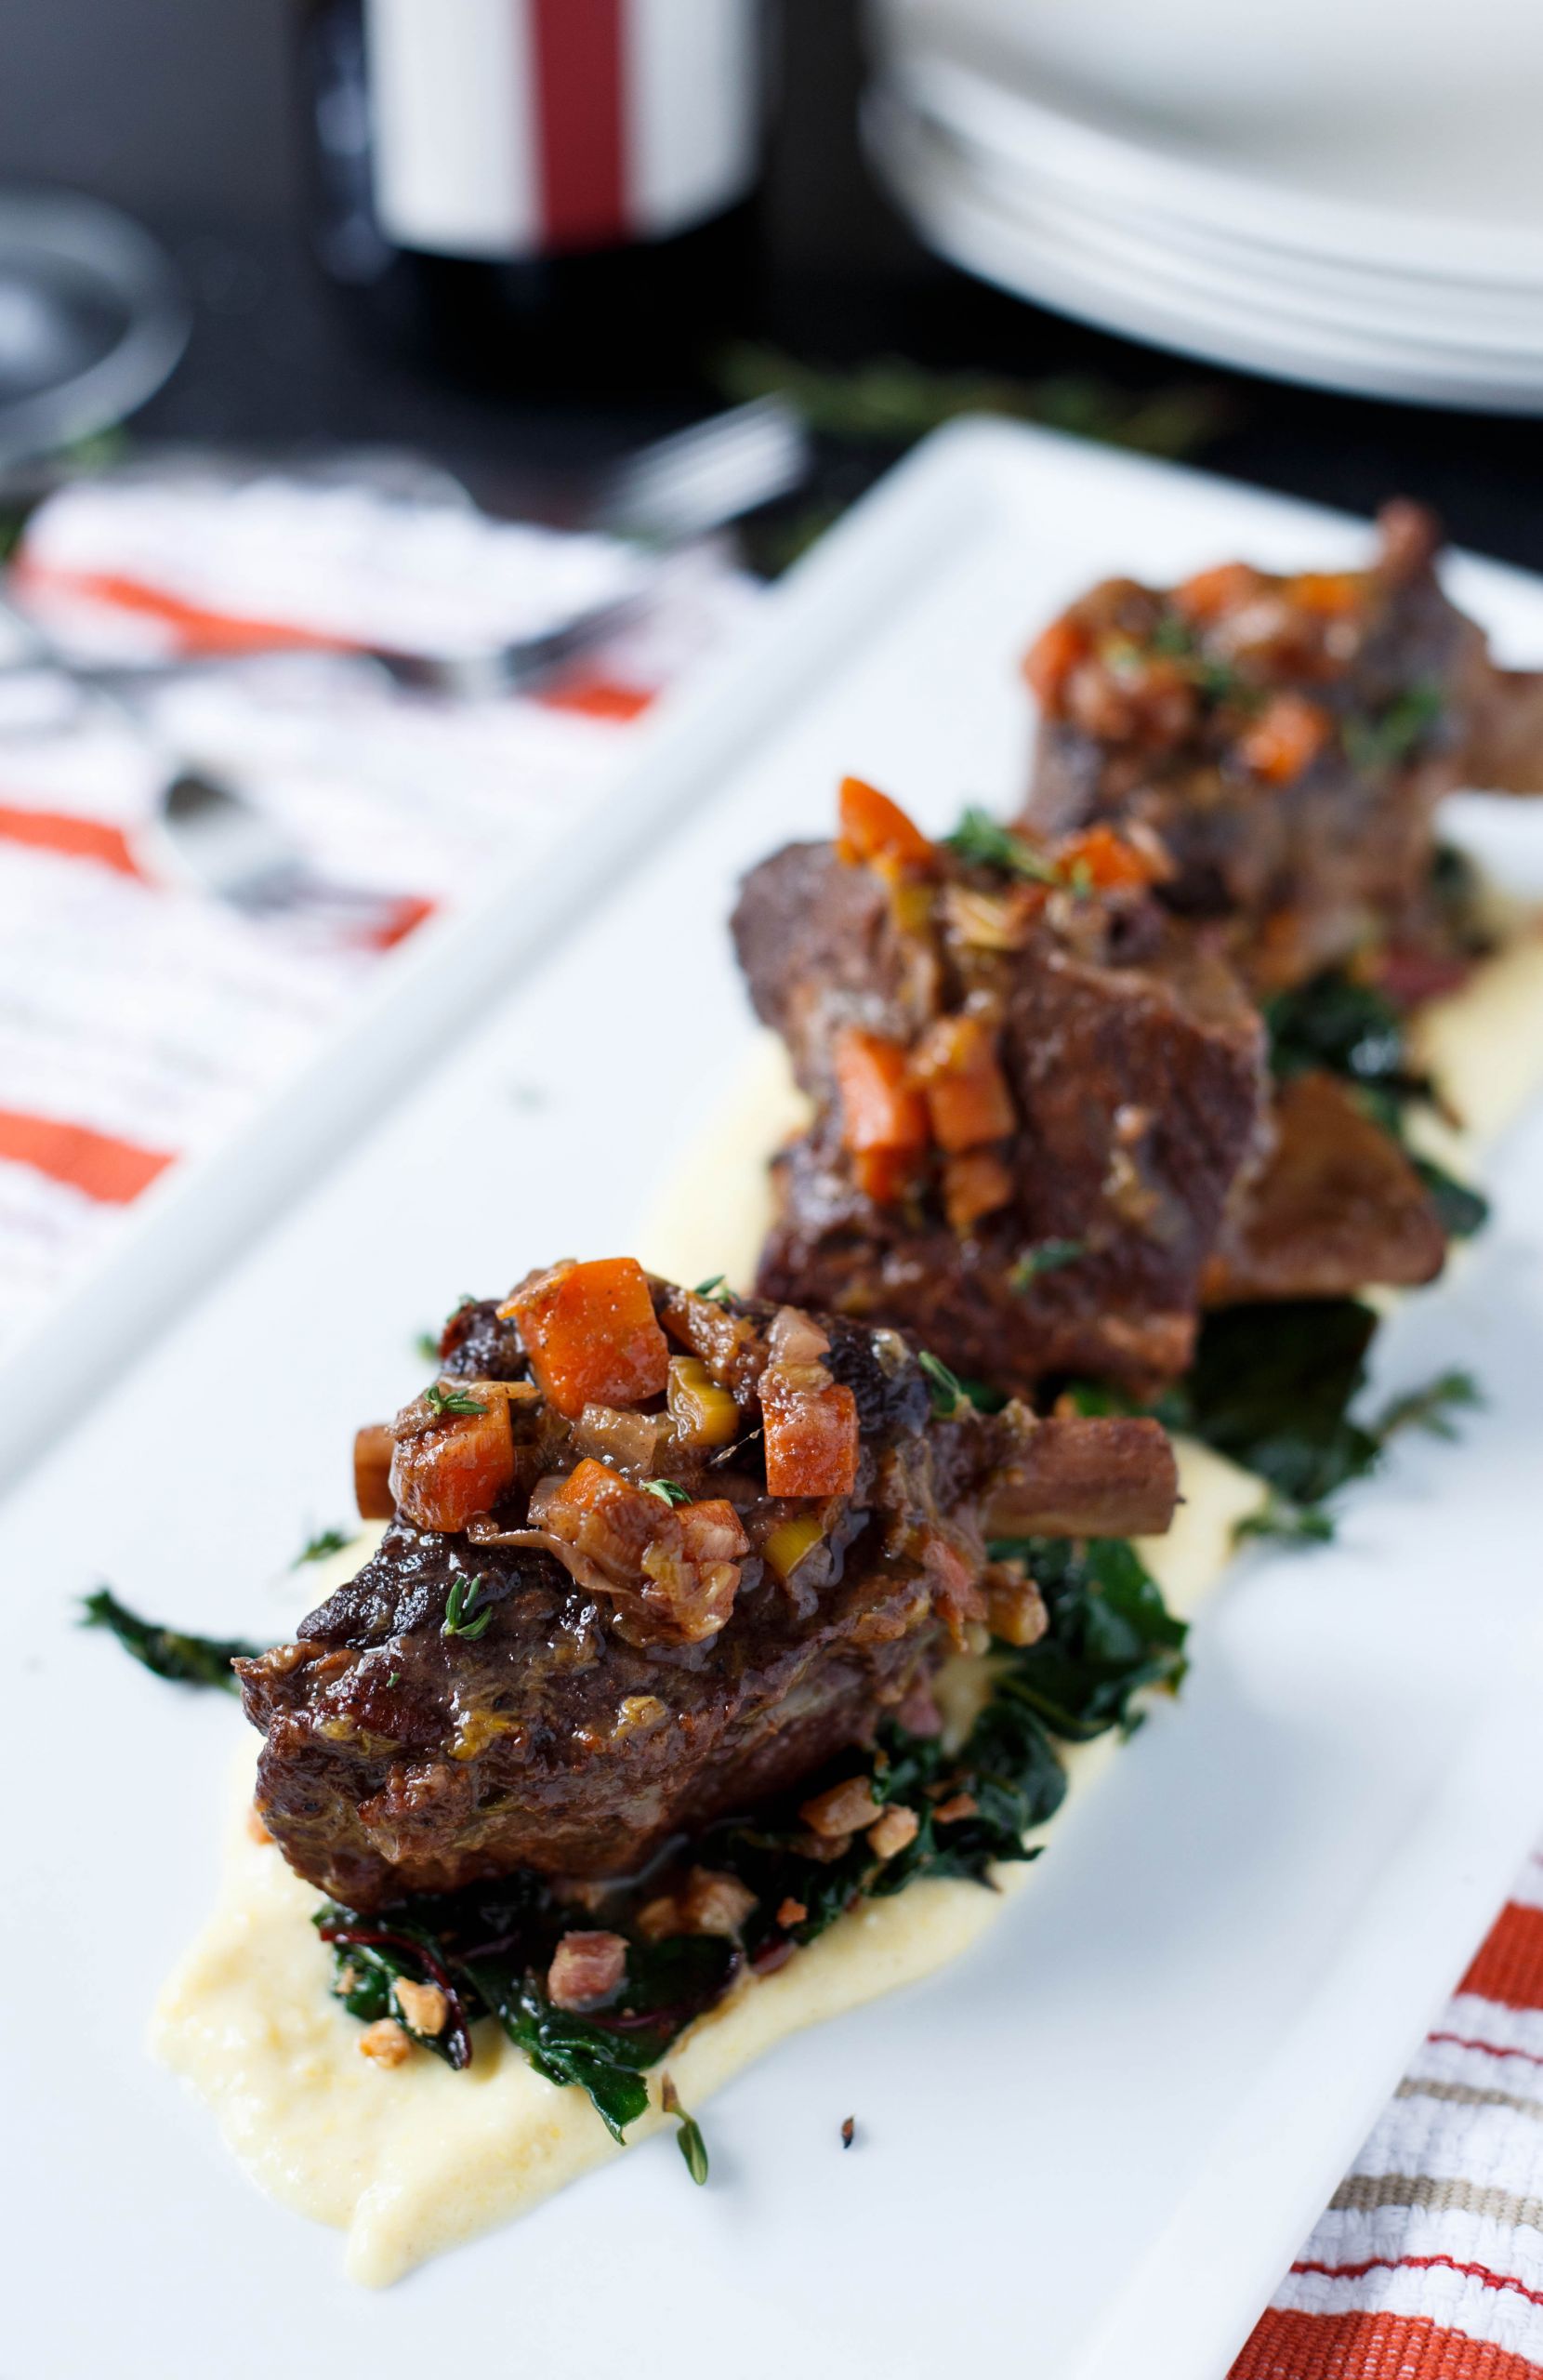 Dinner Party Entrees Ideas
 Braised Short Ribs with Swiss Chard and Polenta